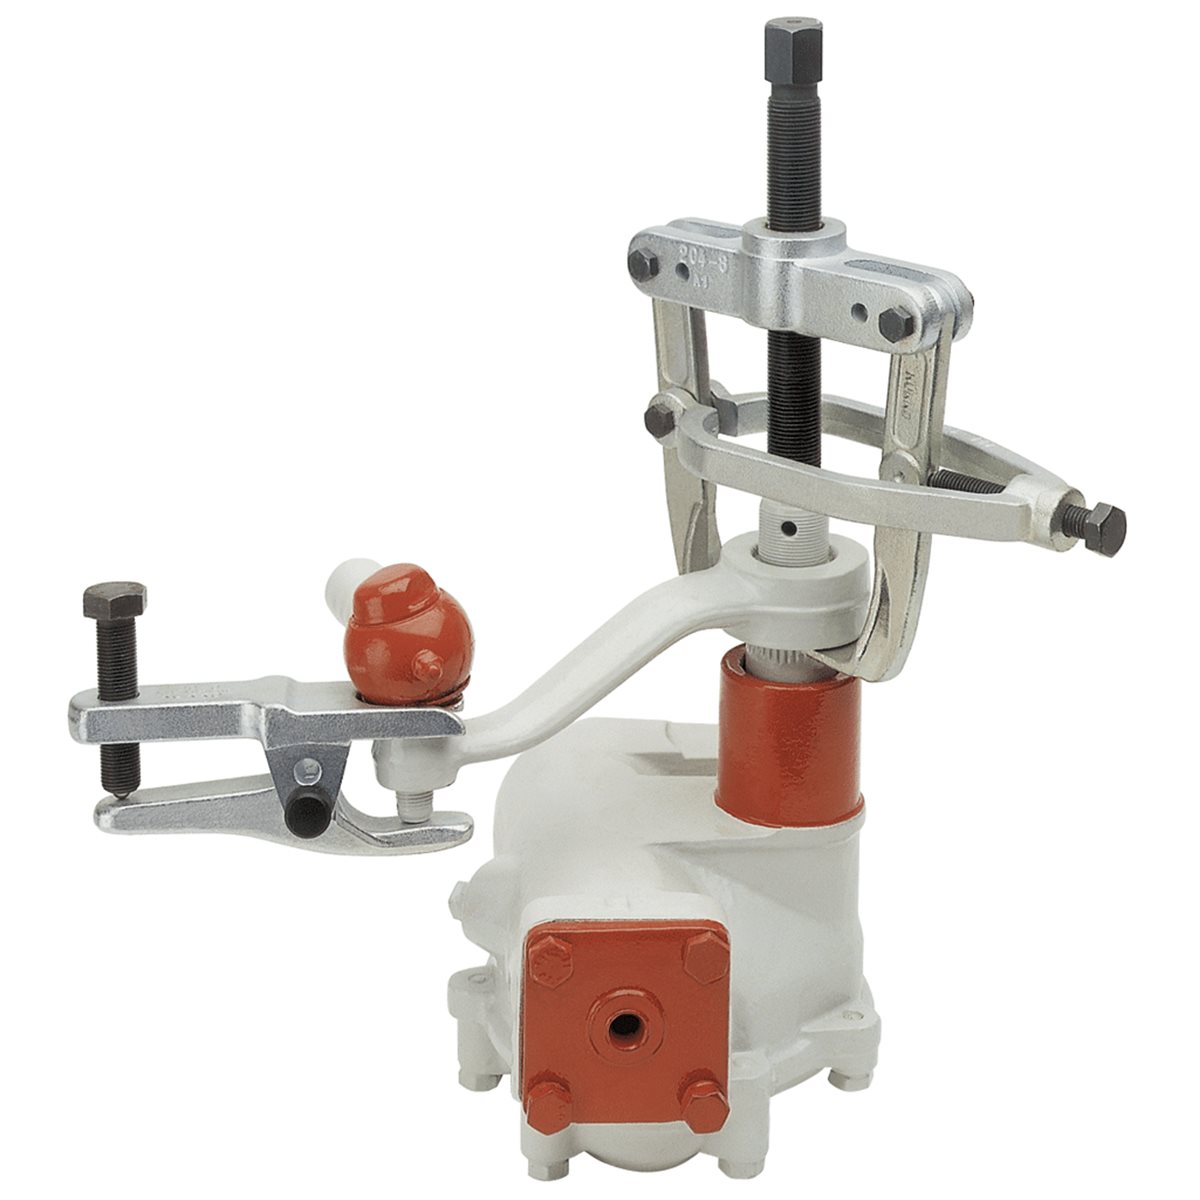 Kukko 2-Arm Bearing Puller with Side Clamp 204-1 For Sale Online